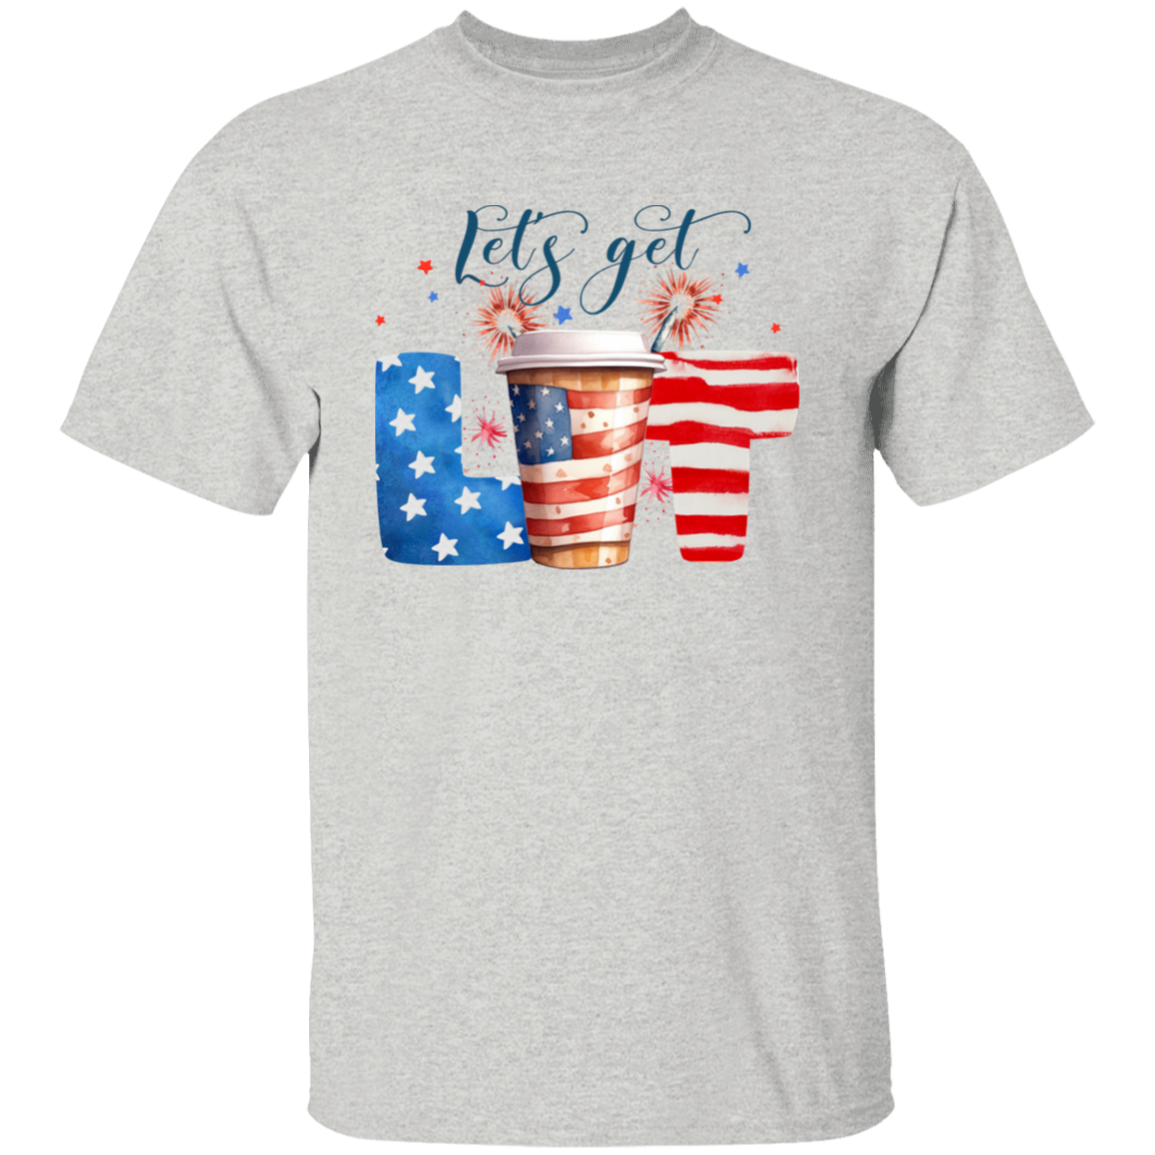 Let's Get Lit 4th of July T-Shirt